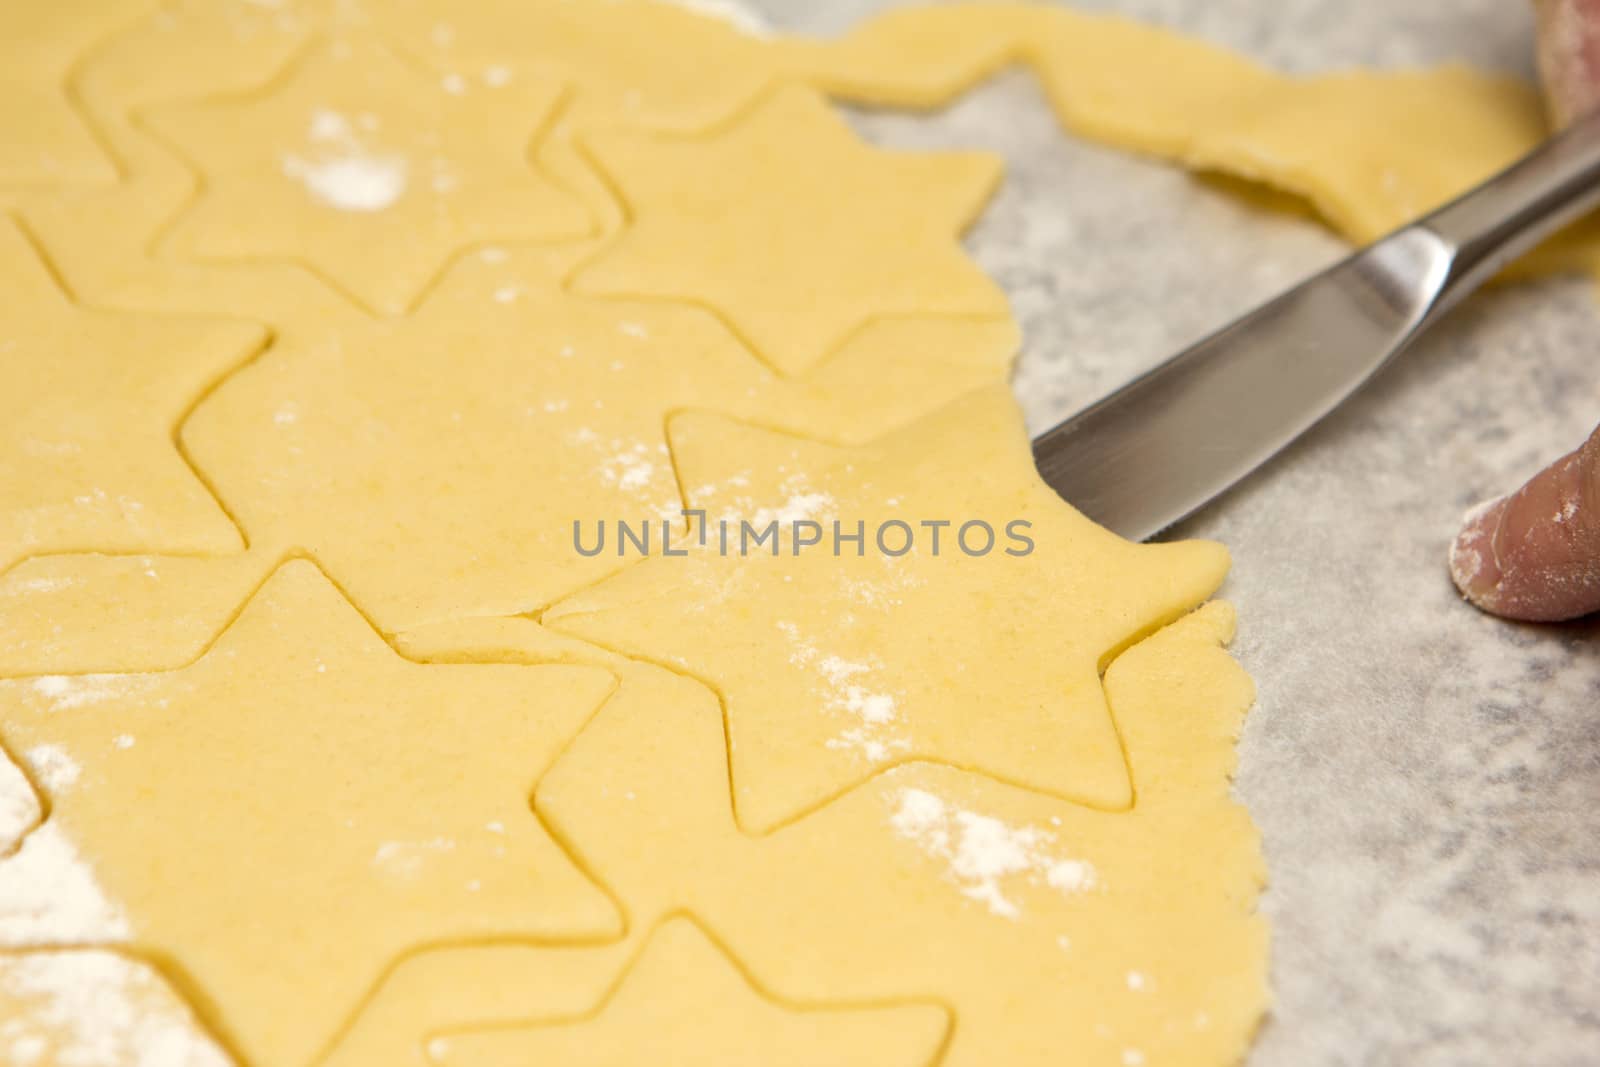 dough, cookie cutter with a knife on baking paper